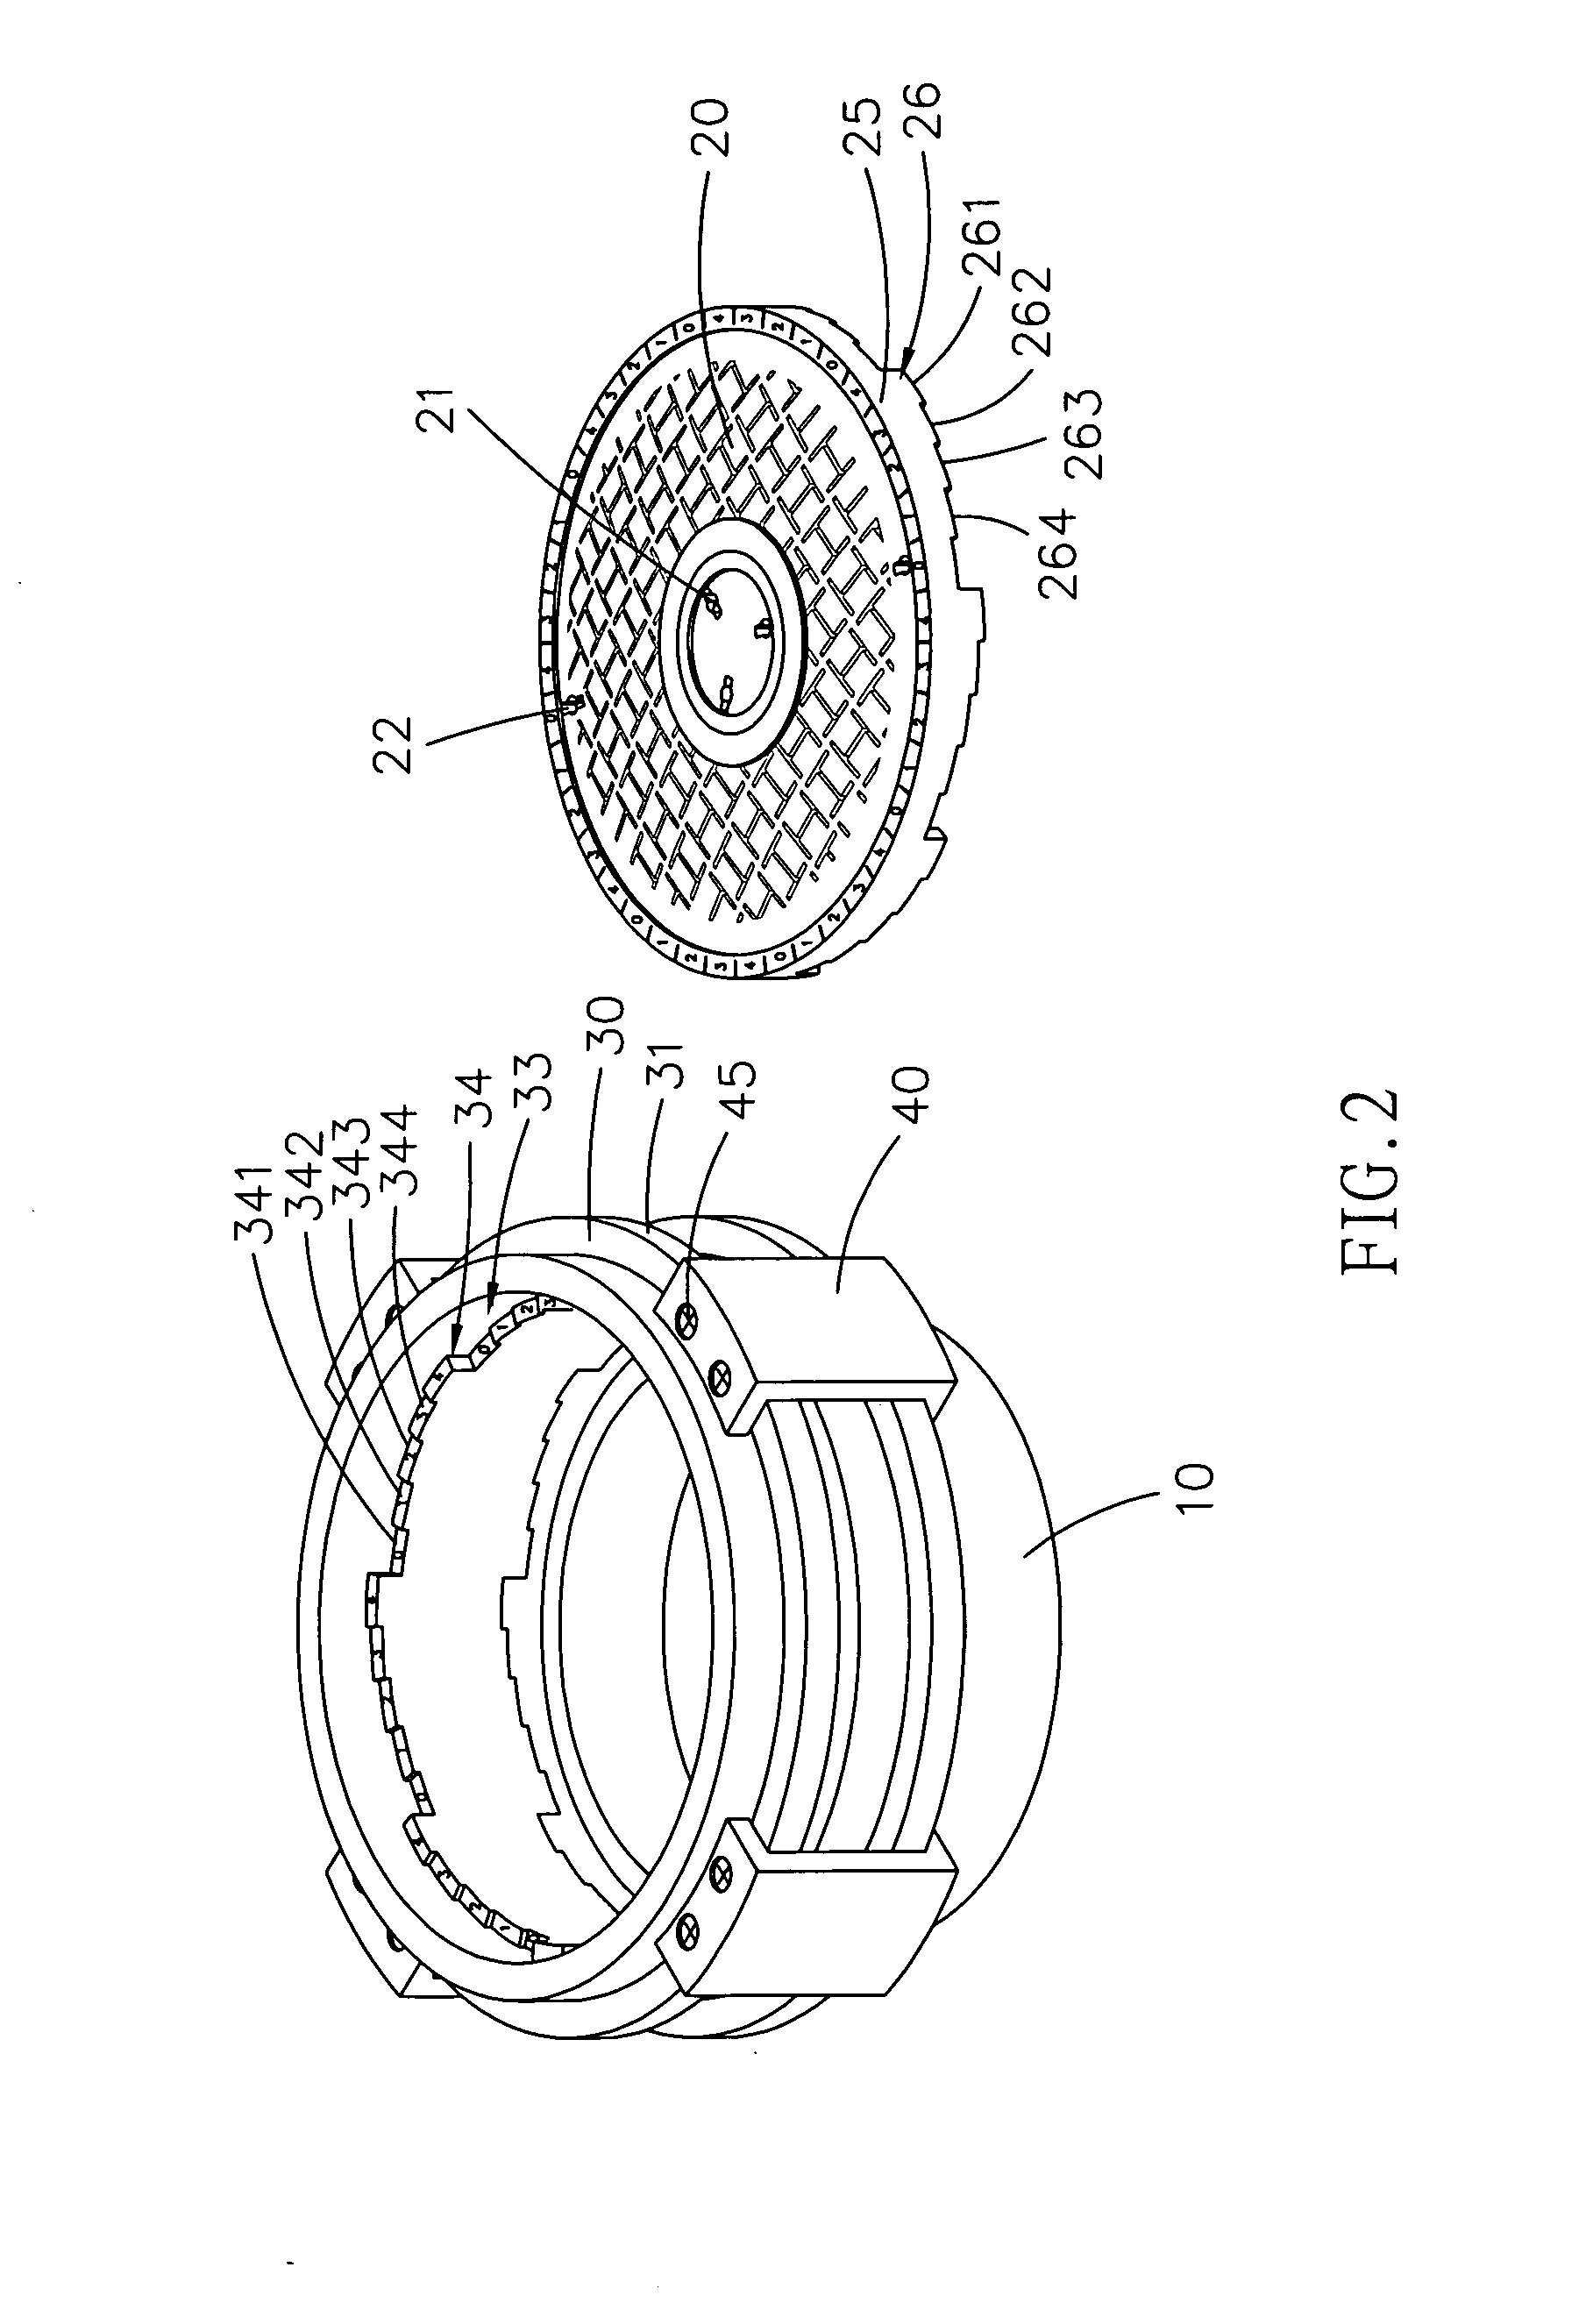 Covering apparatus for opening of underground pipeline or box